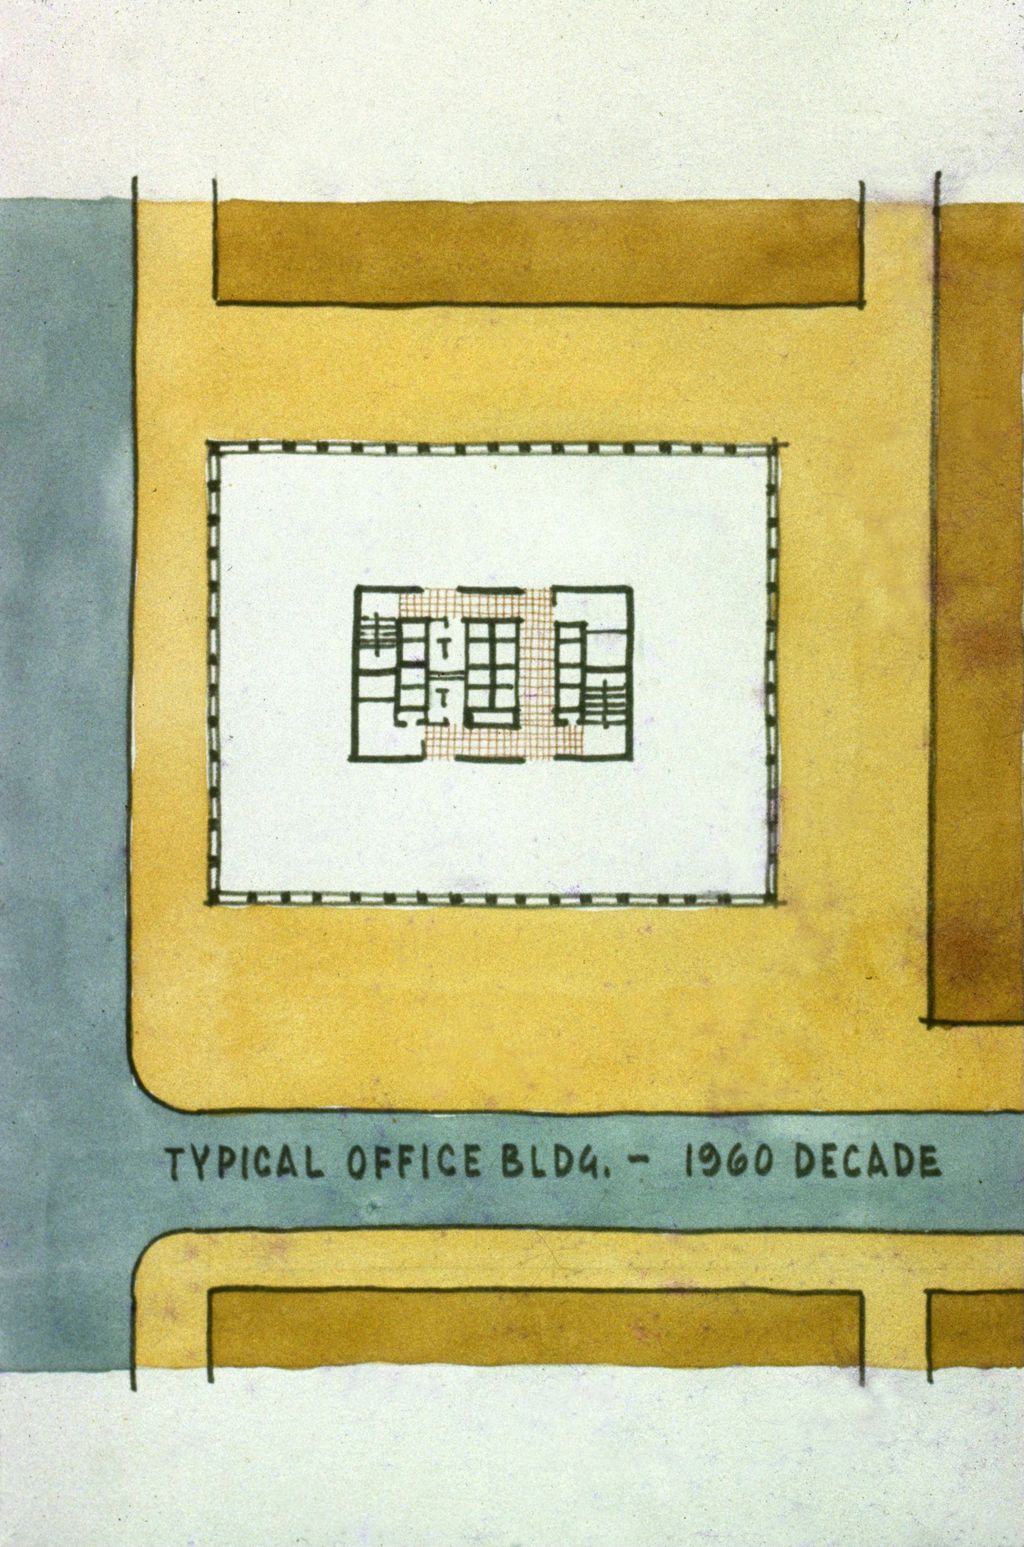 Miniature of Plan of a typical office building of the 1960s